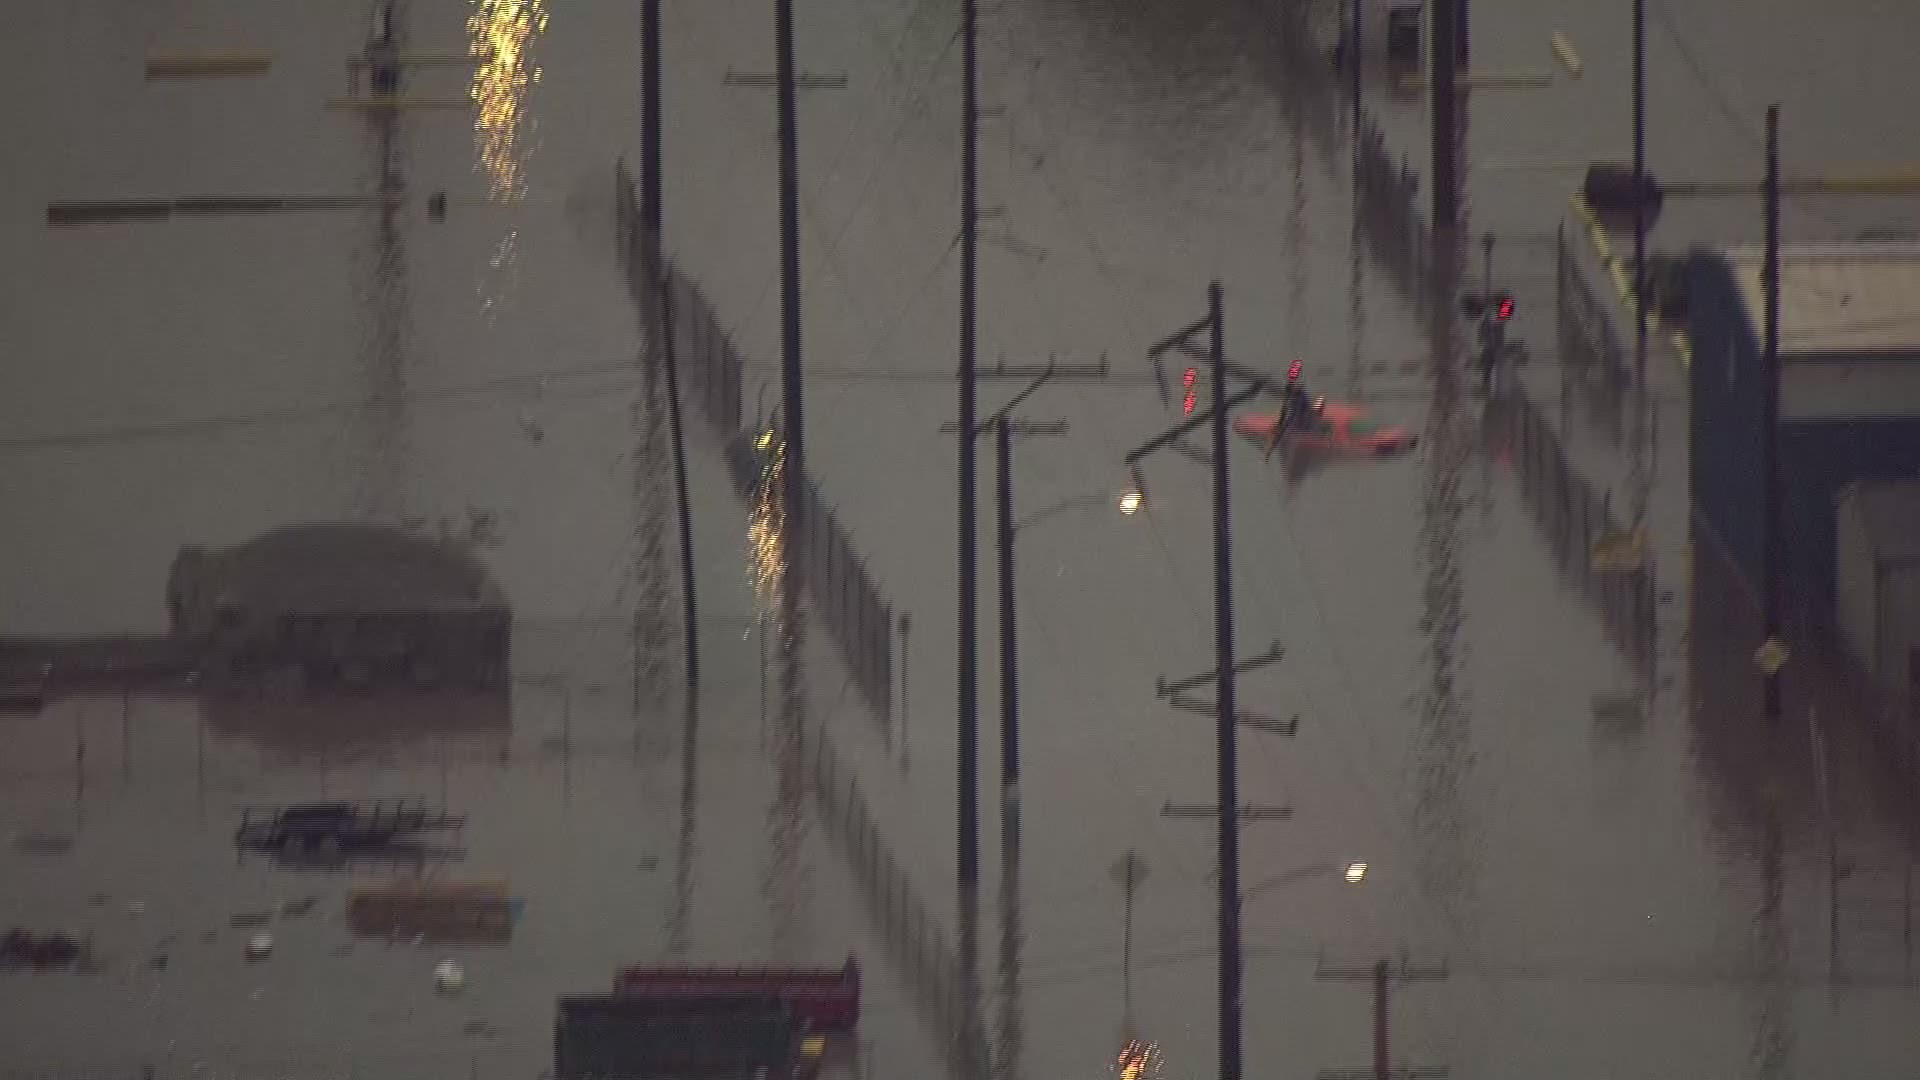 Flash flooding has turned roads into rivers Monday morning in Granite City, Illinois. Several cars have become stuck on roads throughout the city. The area of 20th Street near Omaha was especially bad.